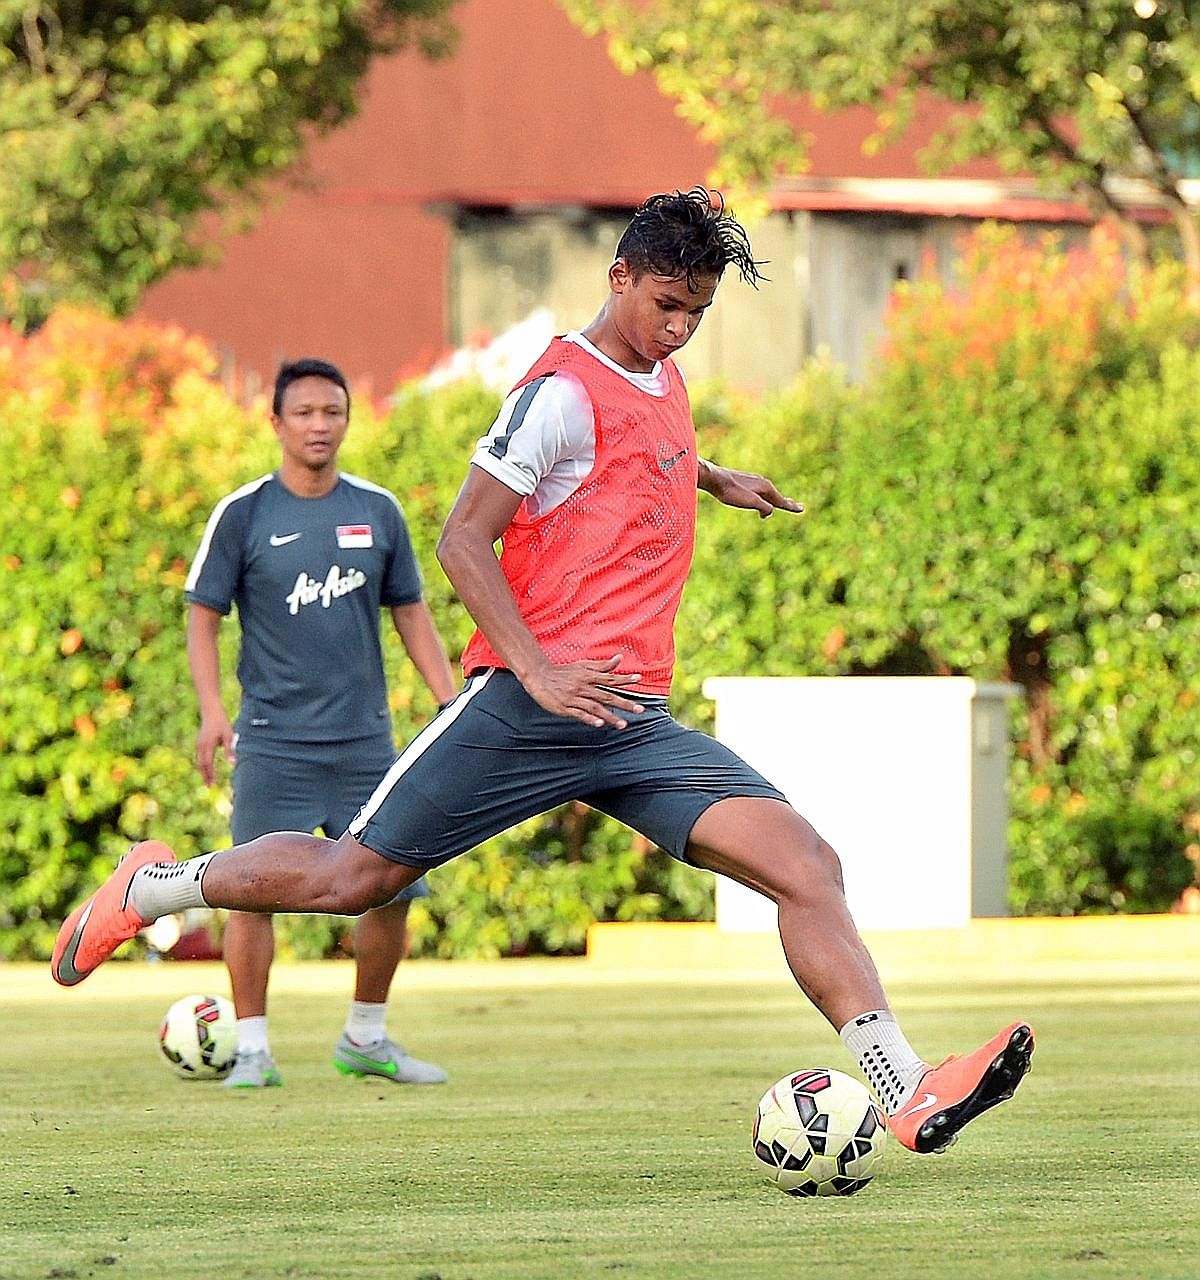 Irfan Fandi shaping to shoot during his first training session with the senior national team in March as his father Fandi Ahmad watches on at the Geylang Field. The 19-year-old may receive his first senior cap against Malaysia next week.